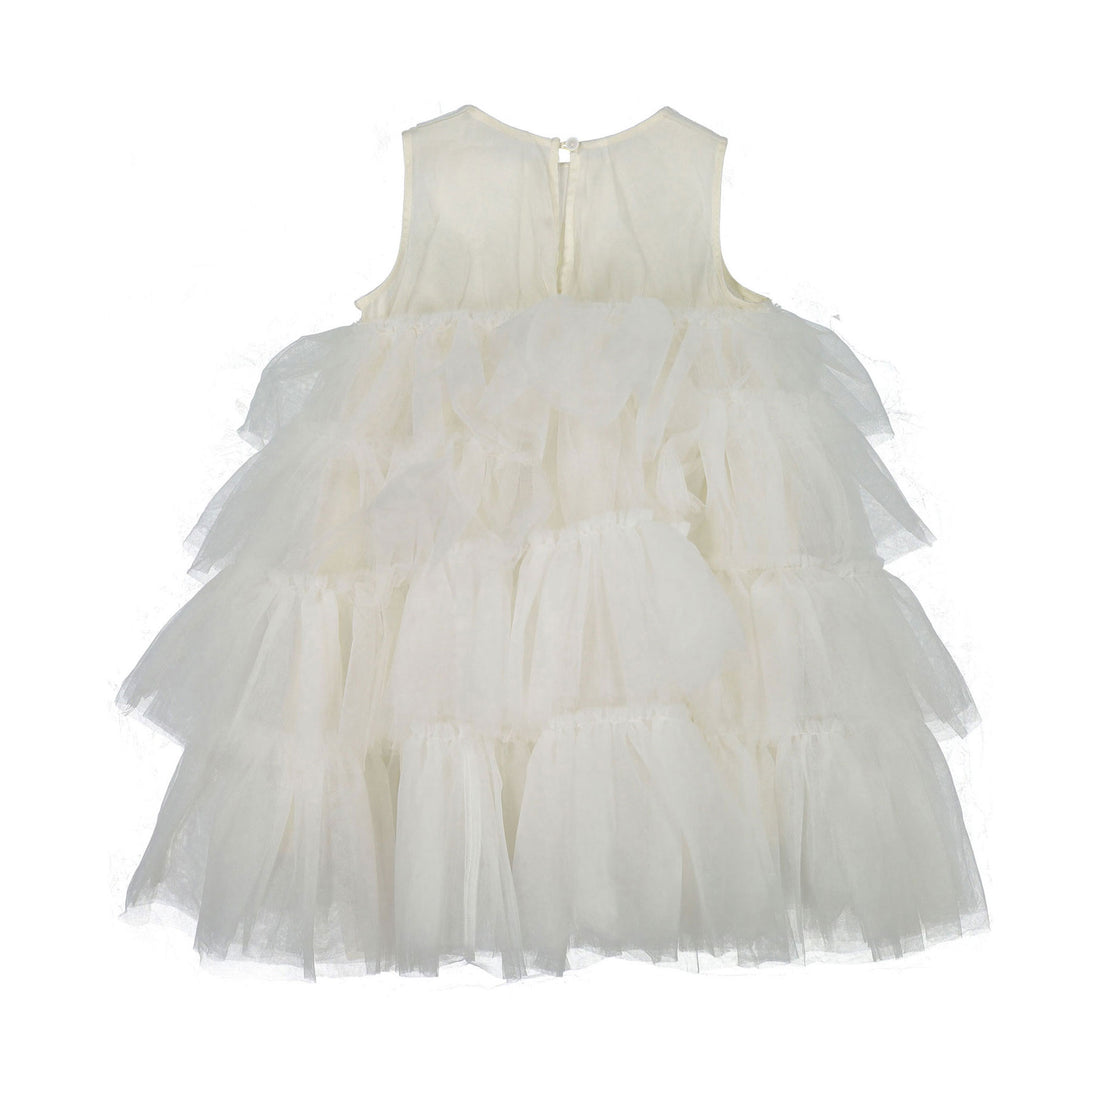 JNBY White Tulle Layered Dress